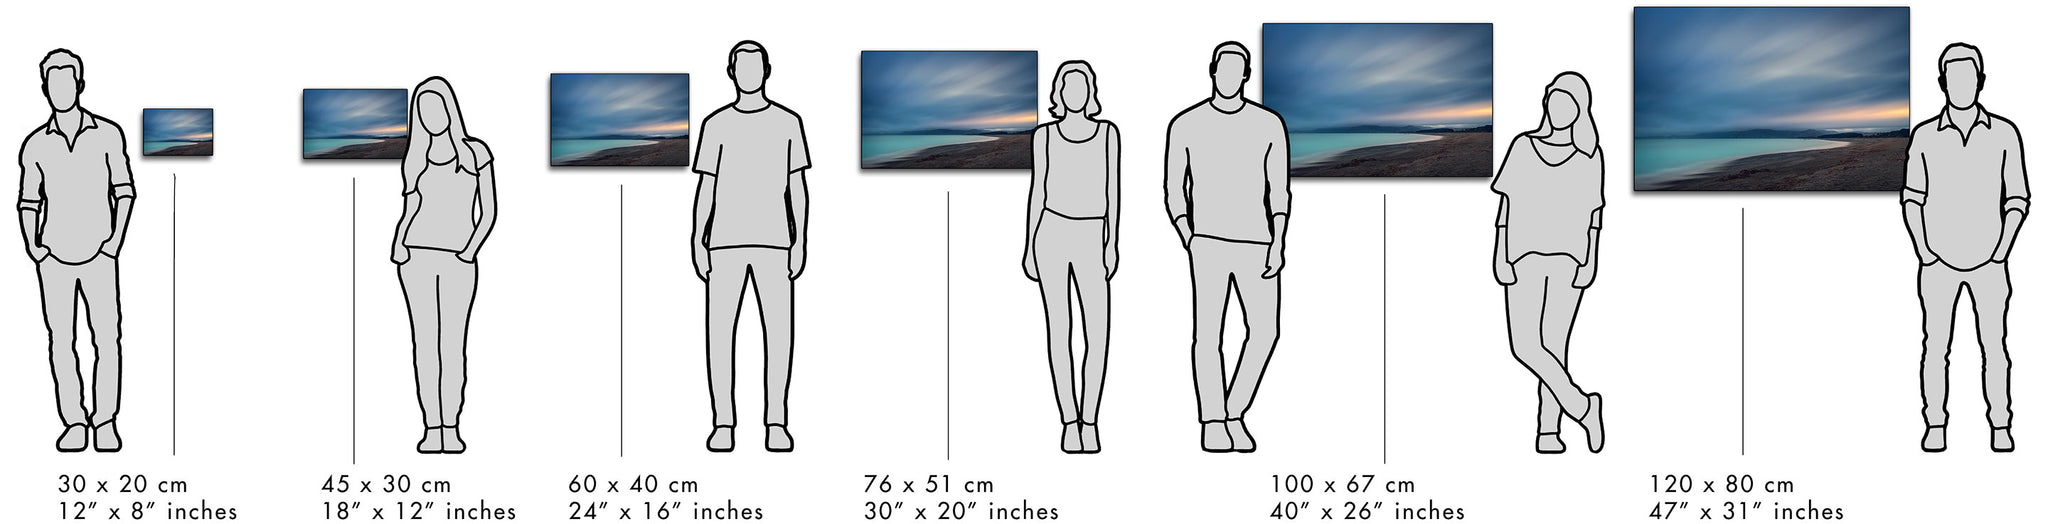 Visual guide to demonstrate the size of the prints in comparison to the size of people